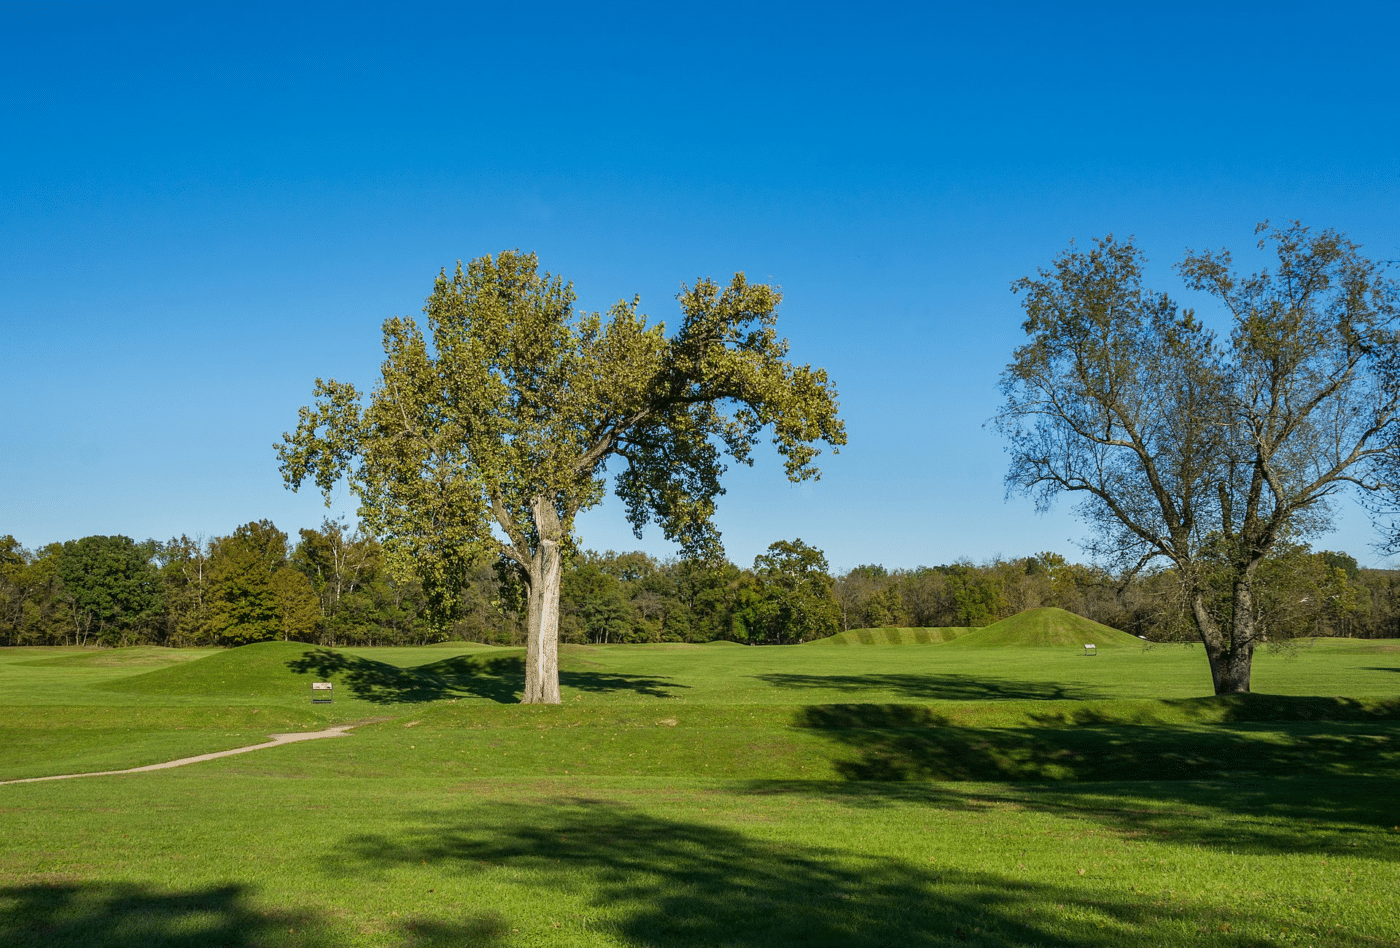 Grassland in Hopewell Culture National Historical Park